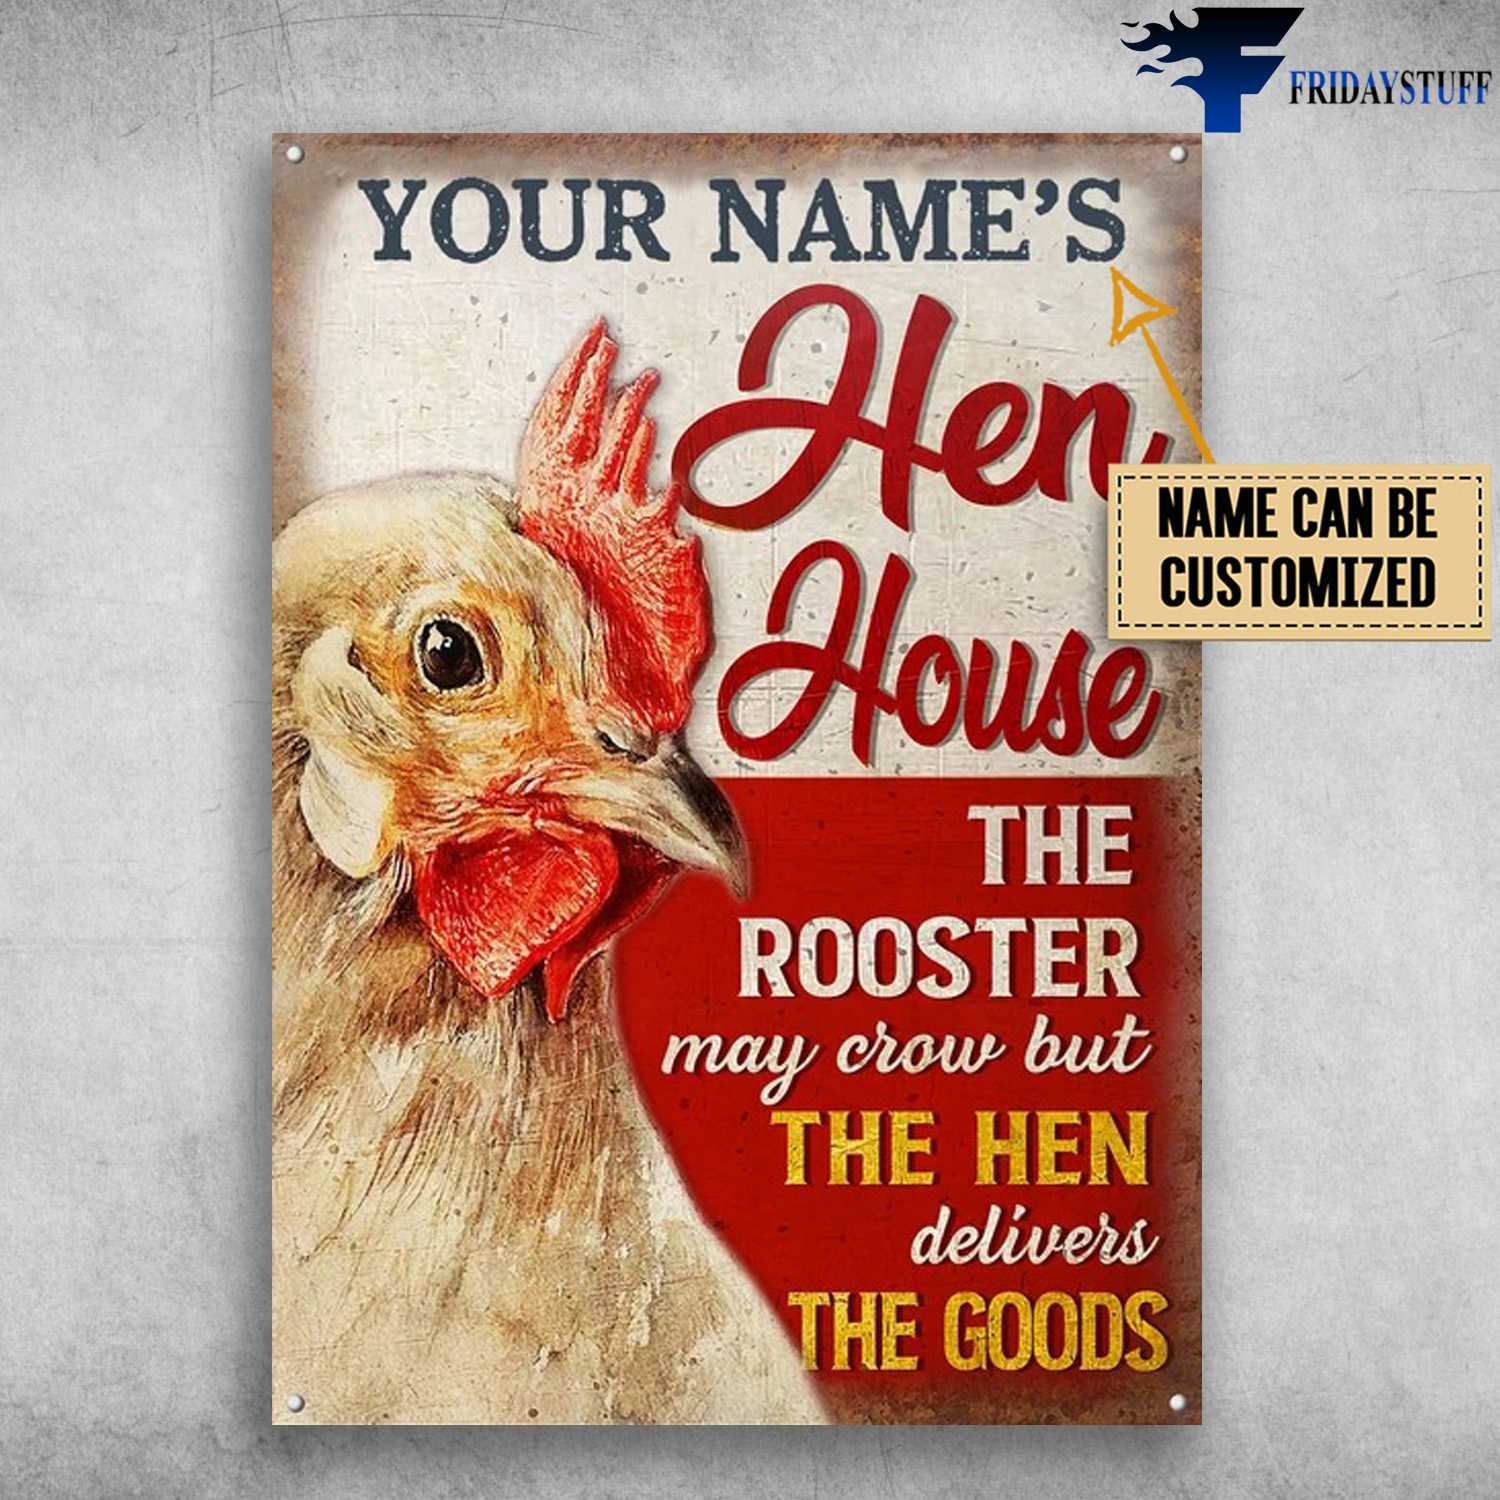 Hen House, The Rooster May Crow, But The Hen Delivers The Goods, Chicken Poster